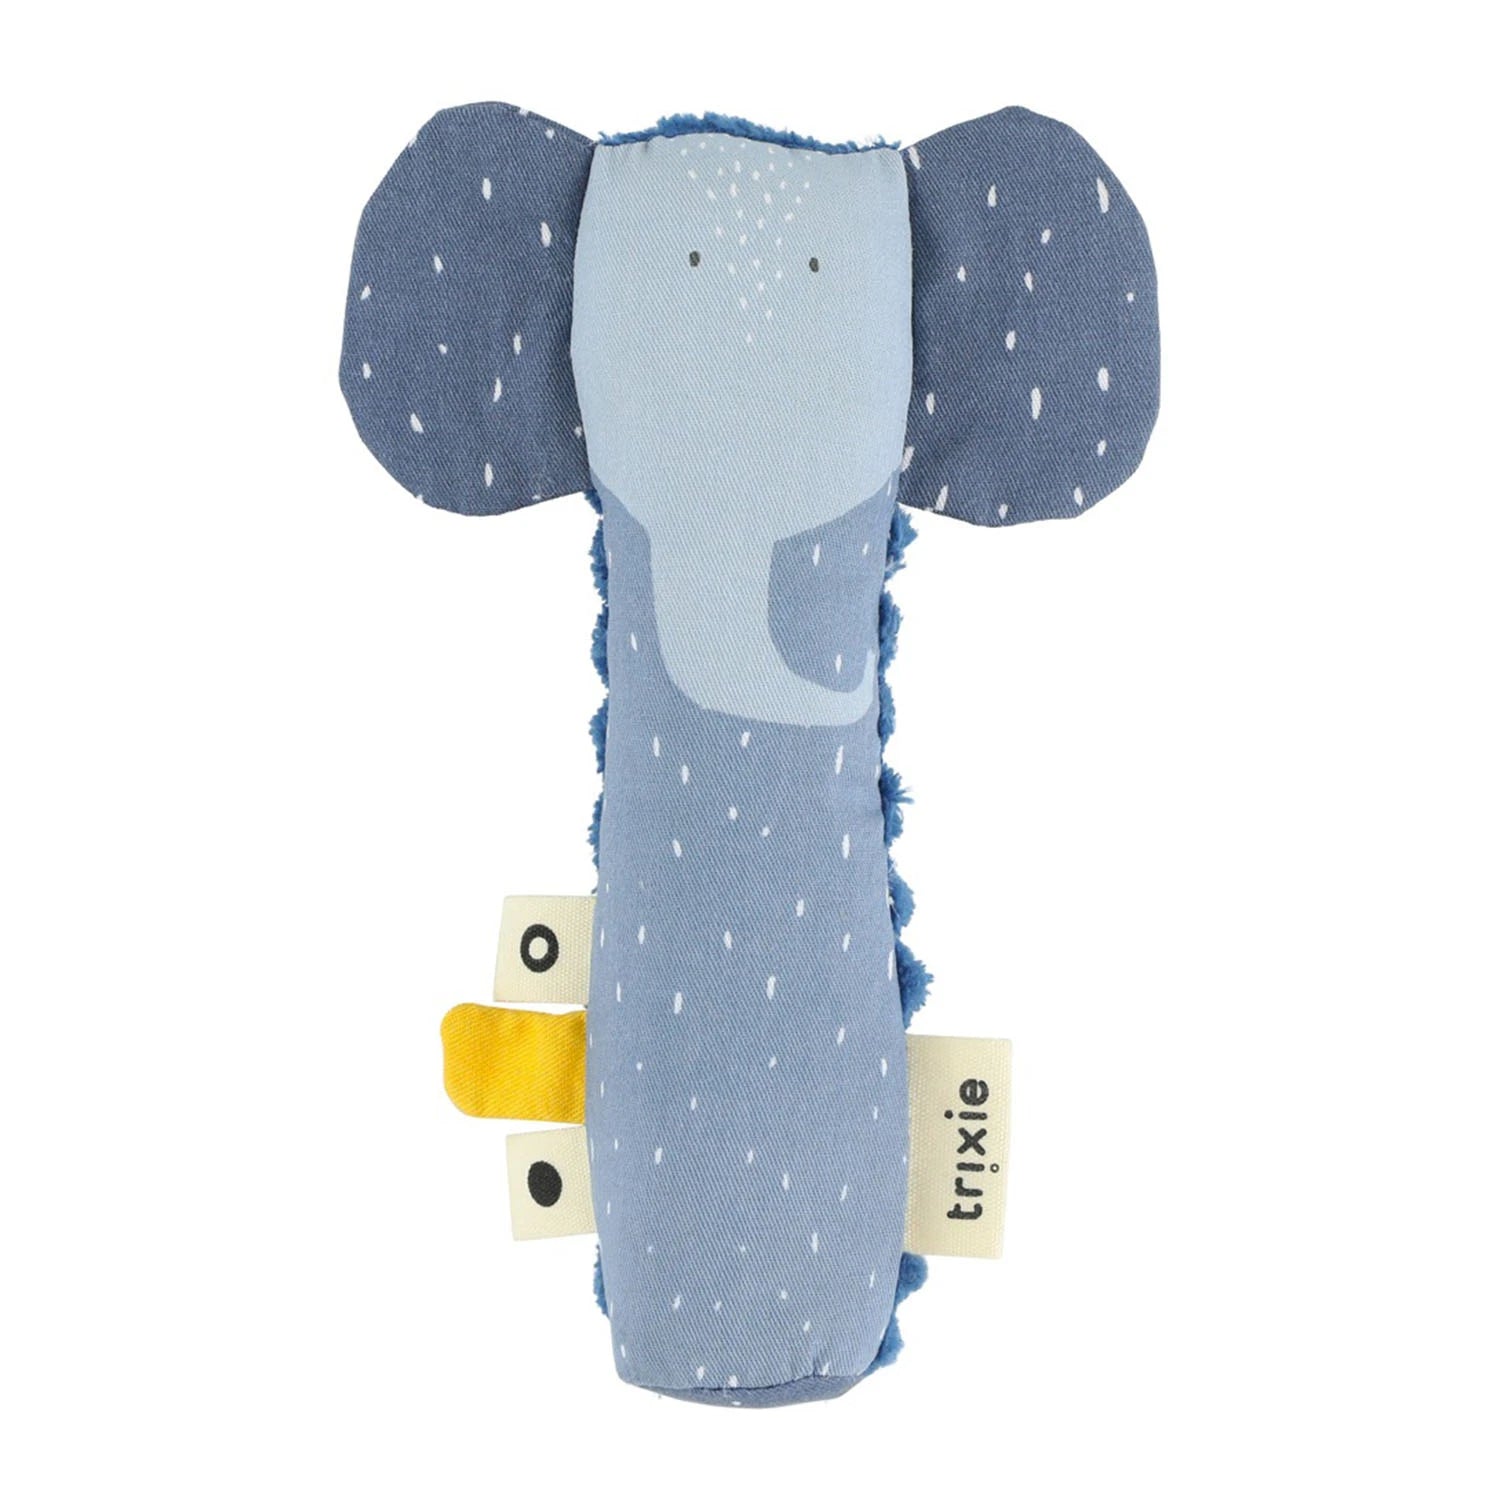 An image of Buy Trixie Baby Squeaker Toy - Mrs. Elephant